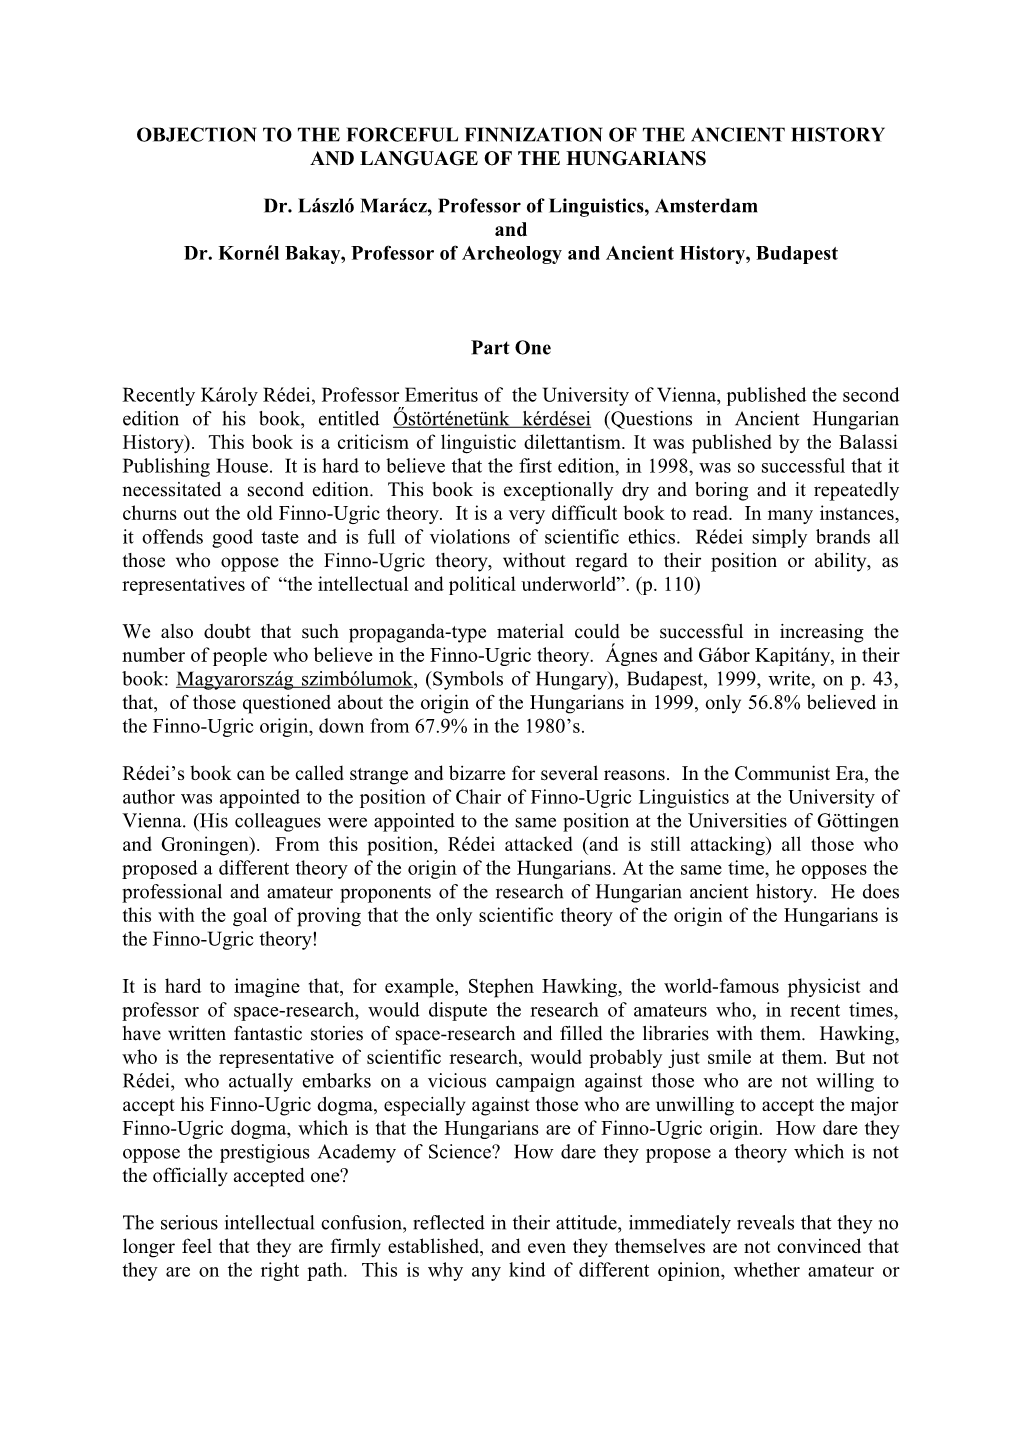 Objection to the Forceful Finnization of the Ancient History and Language of the Hungarians